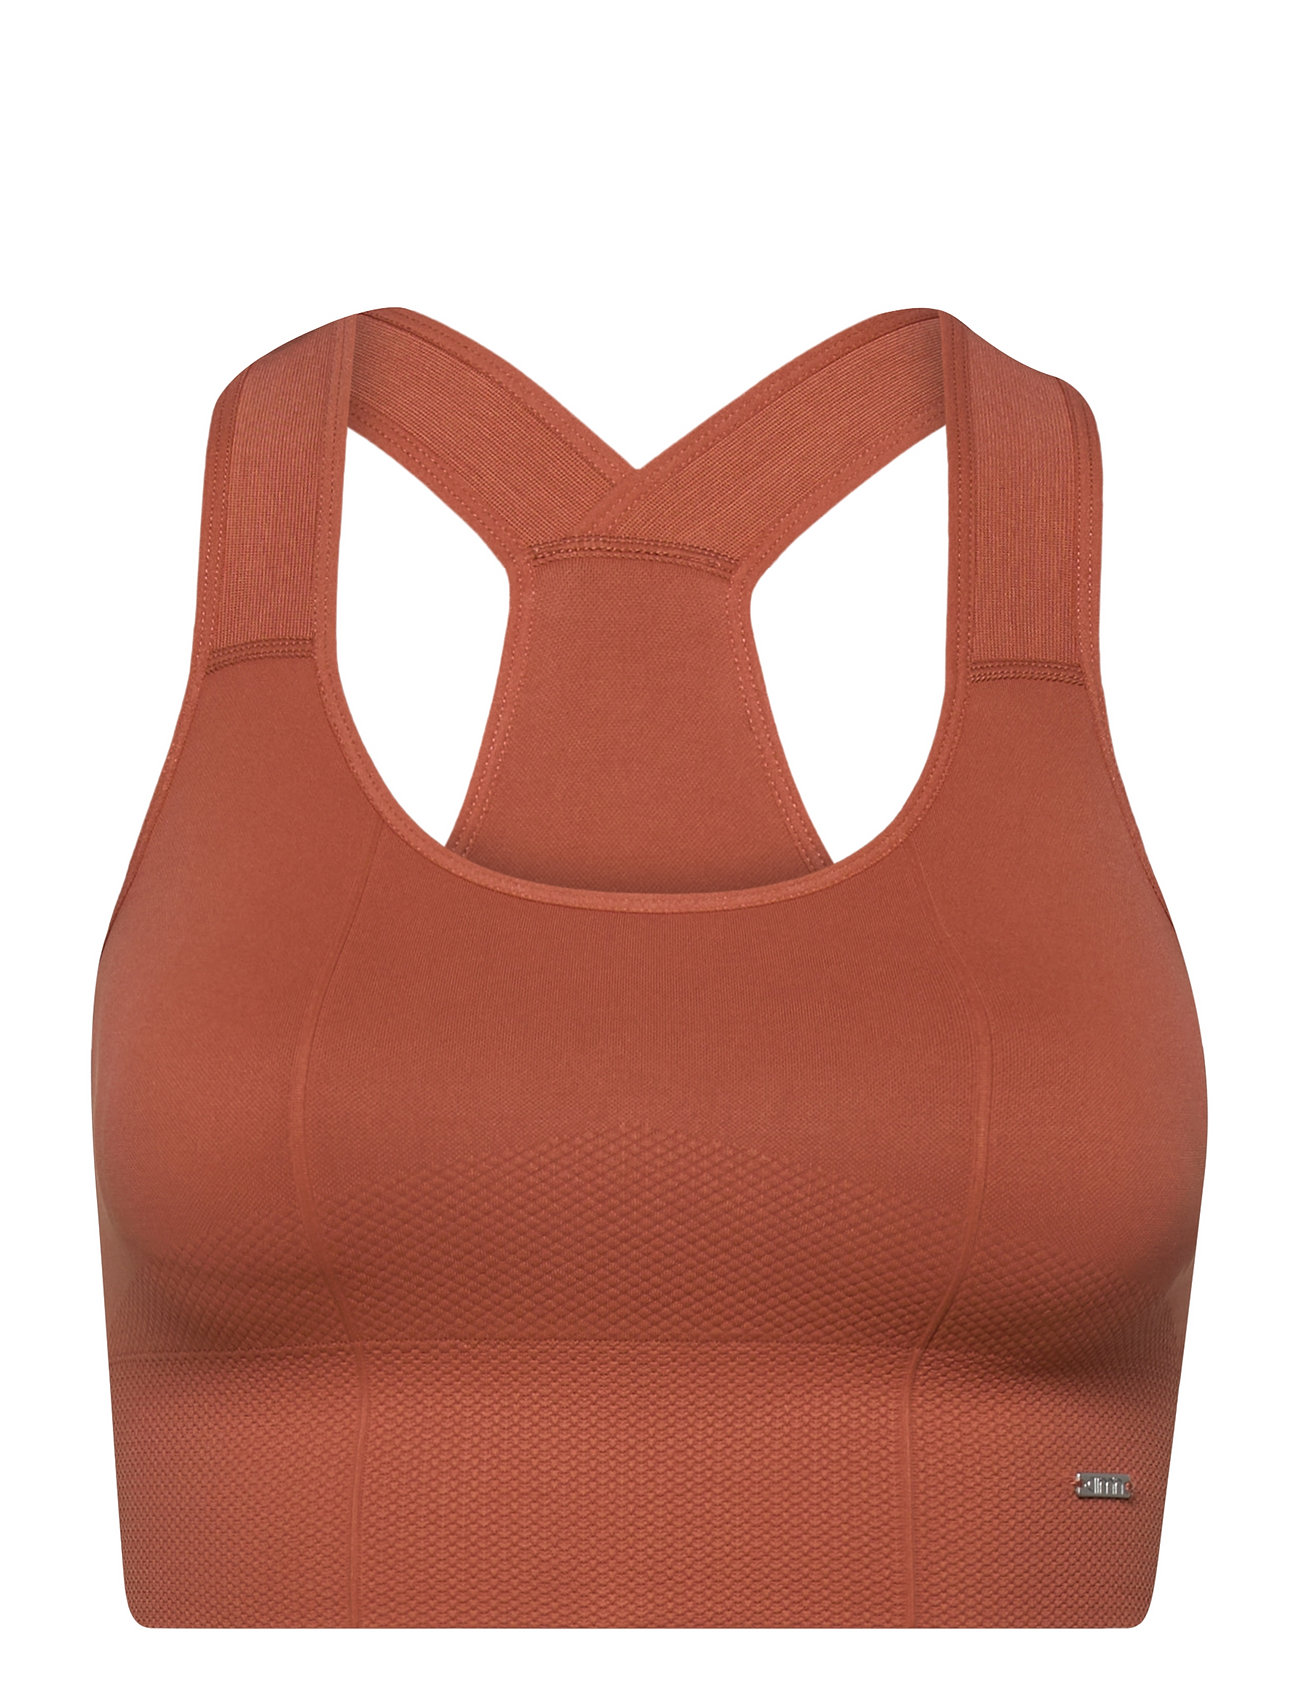 Luxe Seamless High Support Bra Sport Bras & Tops Sports Bras - All Red AIM'N